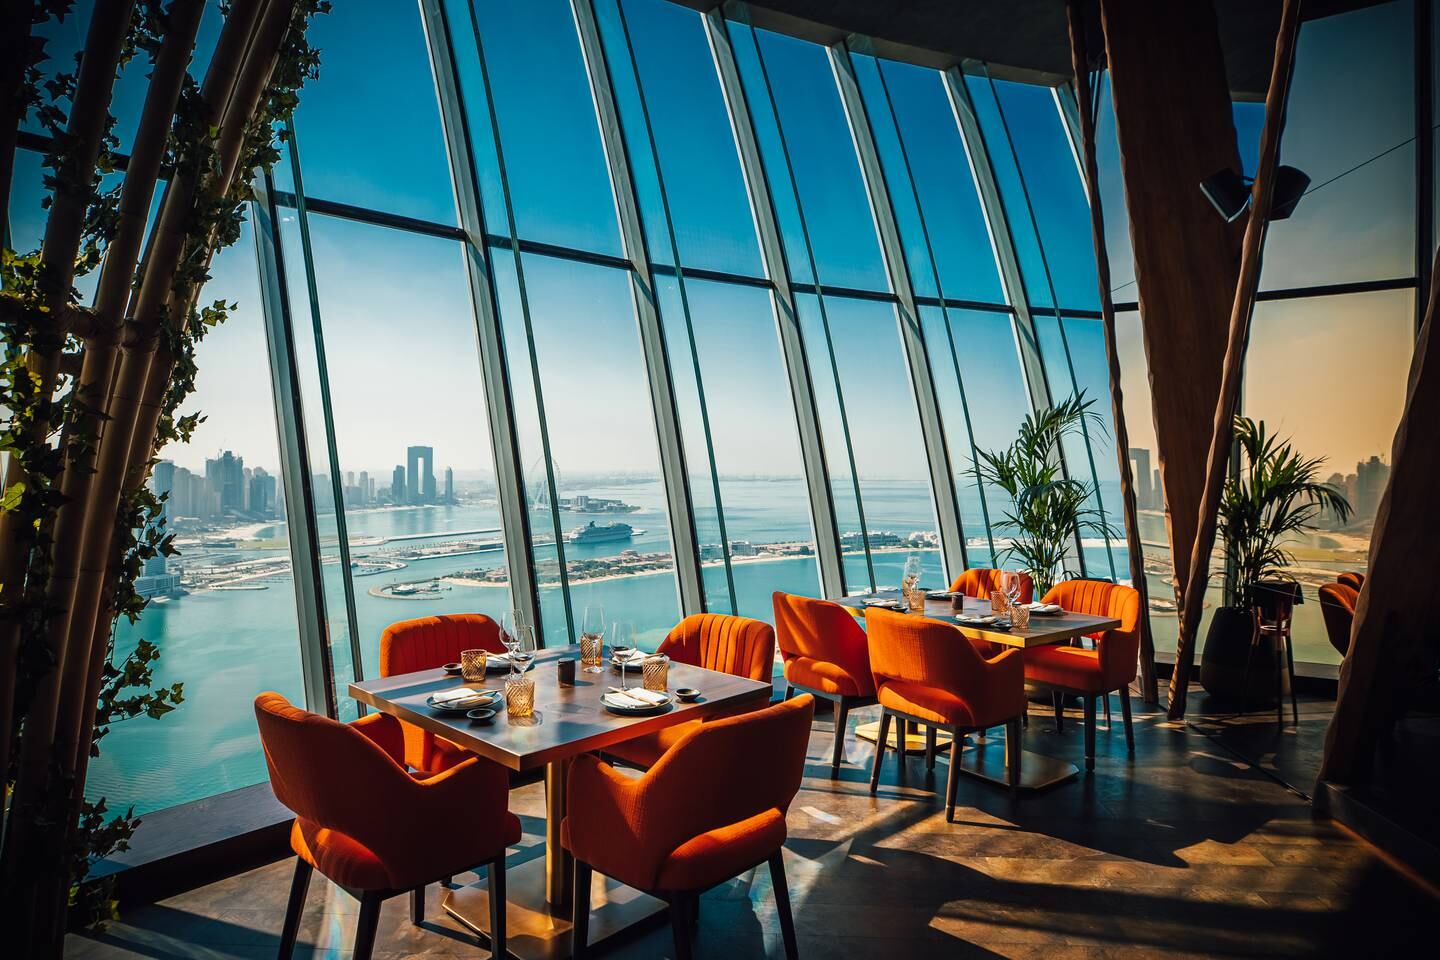 The floor-to-ceiling glass windows that wrap around the entirety of the restaurant offer great views of the city. Photo: SushiSamba